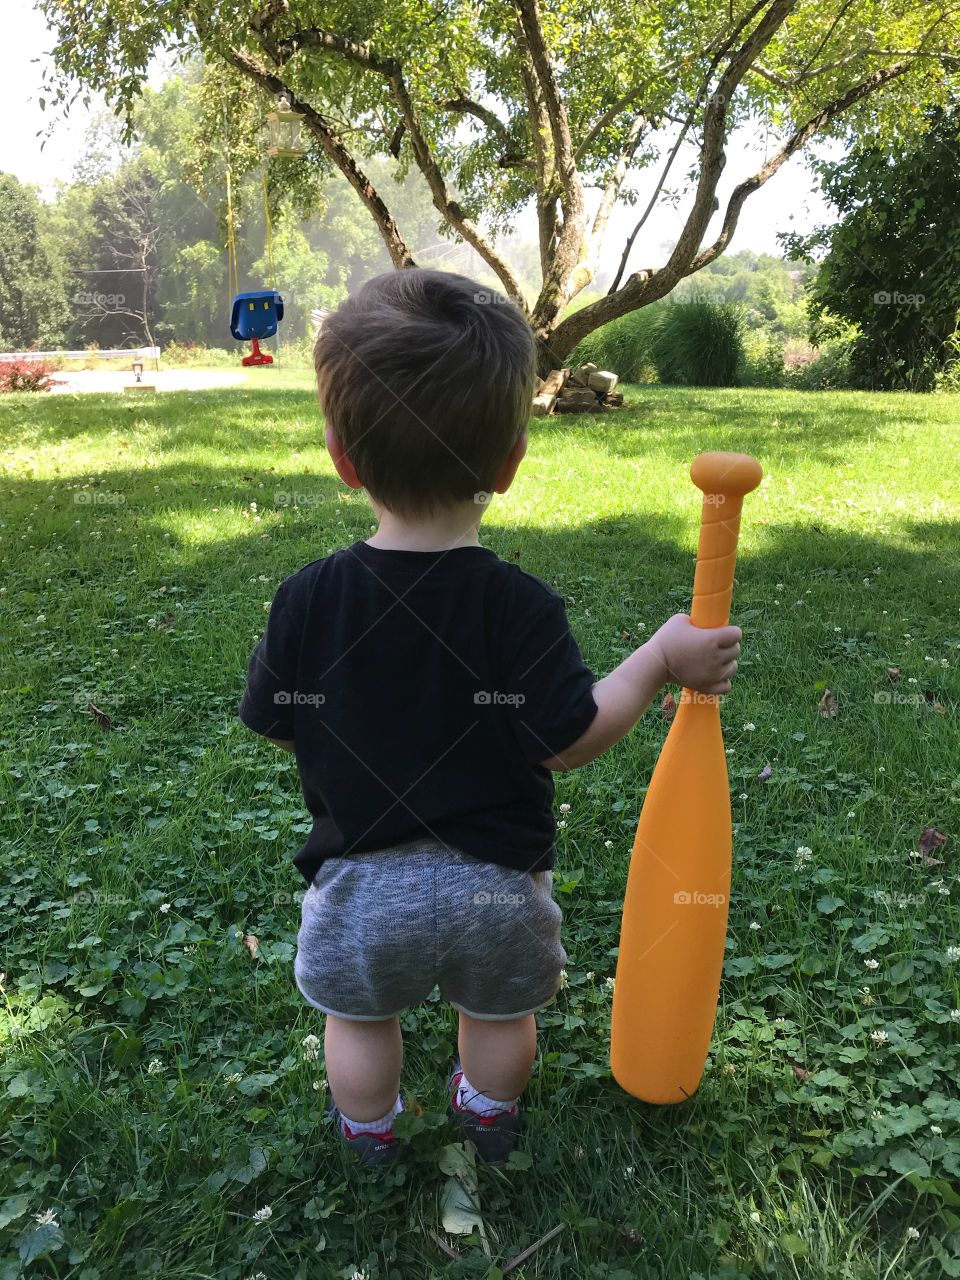 11 month old boy and his bat⚾️